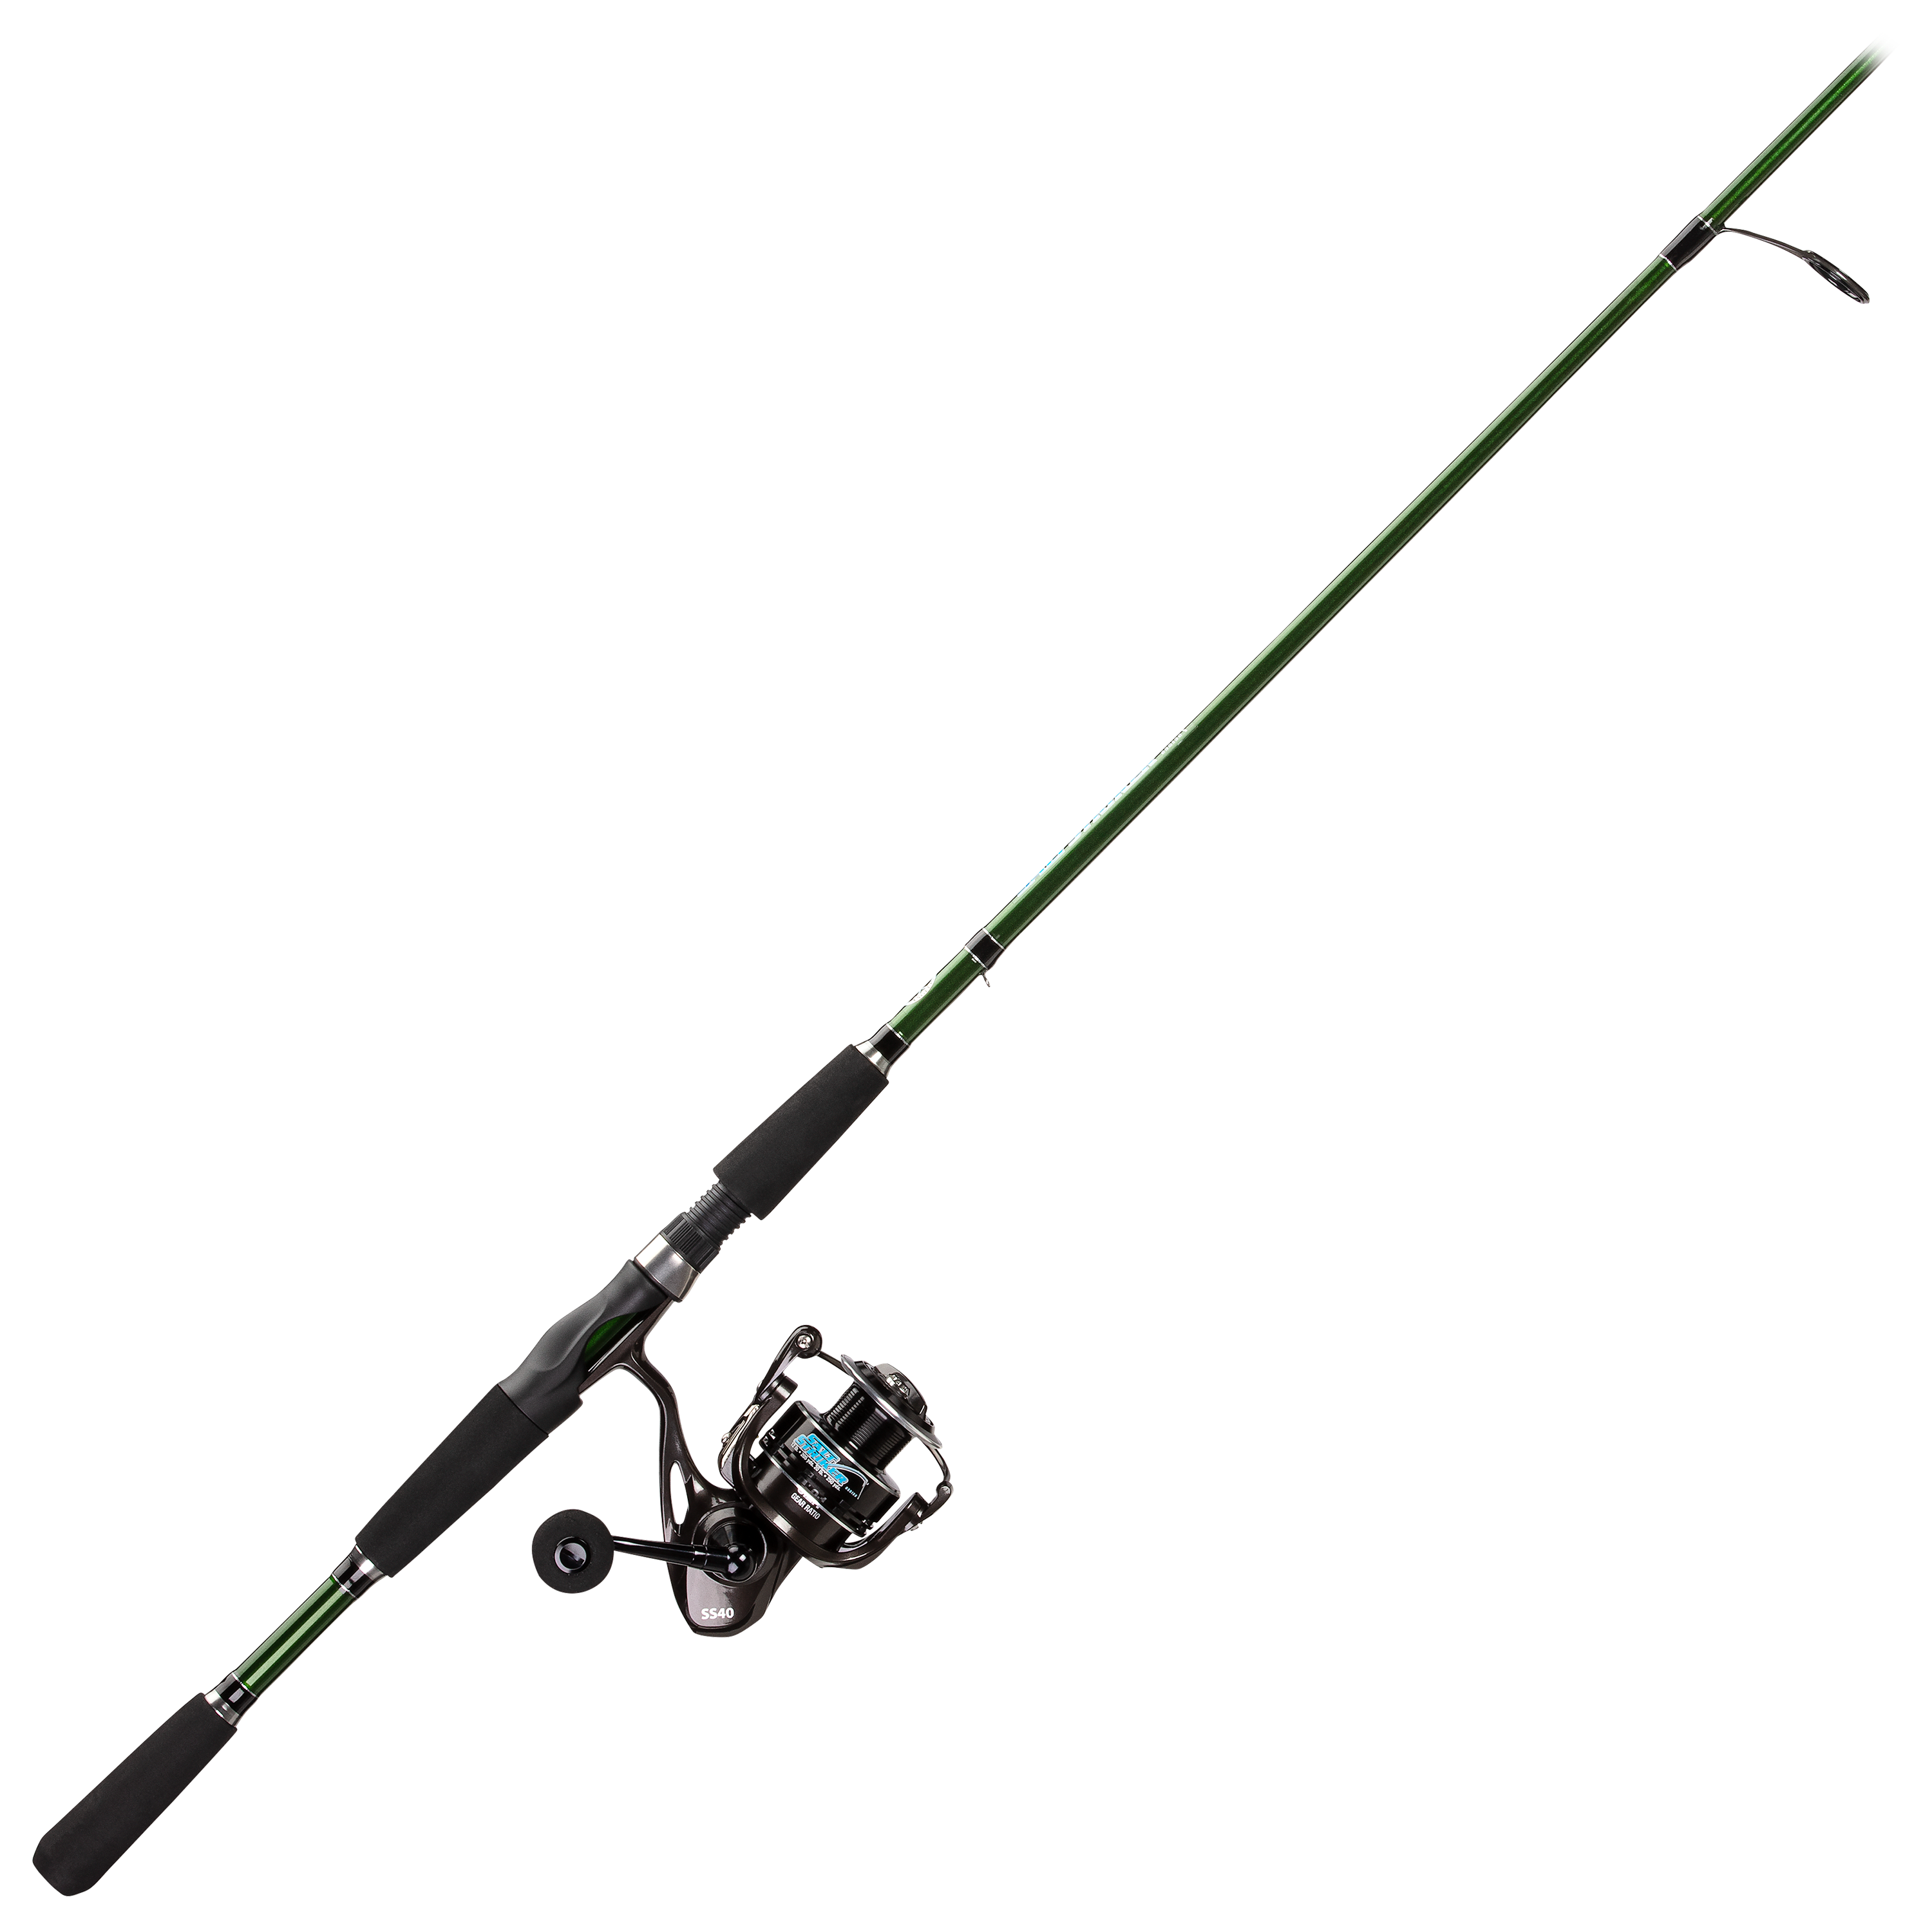 Offshore Angler Sea Lion Conventional Rod - Model SL56122SC